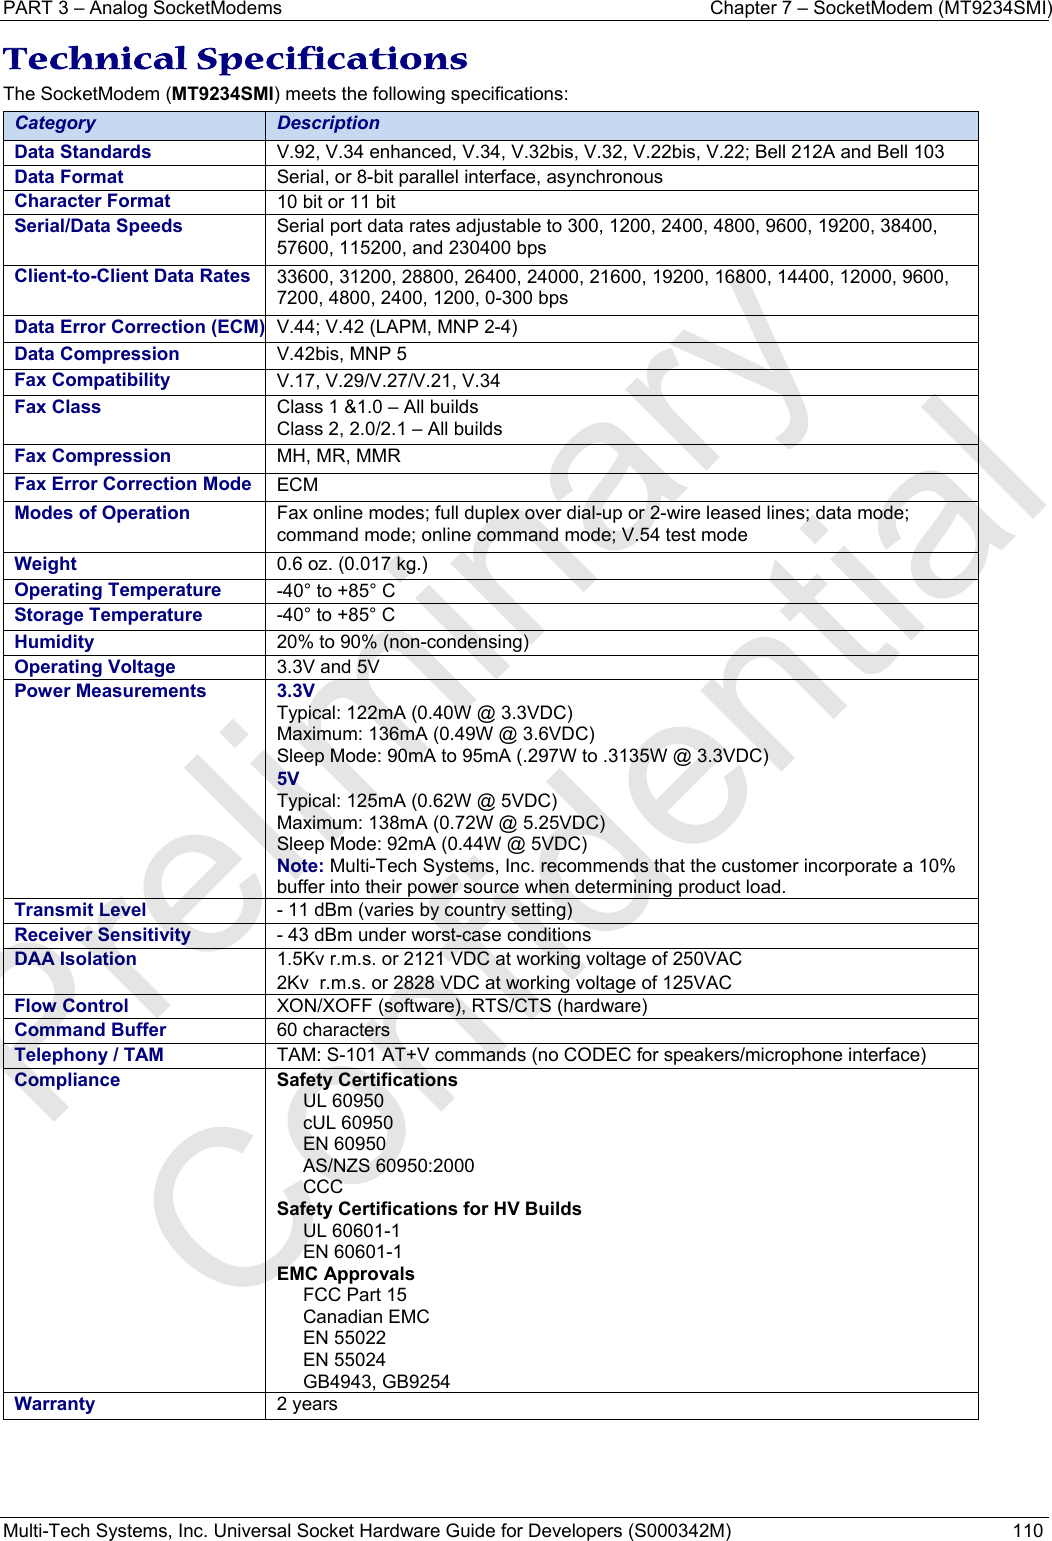 PART 3 – Analog SocketModems  Chapter 7 – SocketModem (MT9234SMI) Multi-Tech Systems, Inc. Universal Socket Hardware Guide for Developers (S000342M)  110  Technical Specifications  The SocketModem (MT9234SMI) meets the following specifications:  Category  Description Data Standards  V.92, V.34 enhanced, V.34, V.32bis, V.32, V.22bis, V.22; Bell 212A and Bell 103 Data Format  Serial, or 8-bit parallel interface, asynchronous Character Format  10 bit or 11 bit Serial/Data Speeds   Serial port data rates adjustable to 300, 1200, 2400, 4800, 9600, 19200, 38400, 57600, 115200, and 230400 bps Client-to-Client Data Rates 33600, 31200, 28800, 26400, 24000, 21600, 19200, 16800, 14400, 12000, 9600, 7200, 4800, 2400, 1200, 0-300 bps Data Error Correction (ECM) V.44; V.42 (LAPM, MNP 2-4) Data Compression  V.42bis, MNP 5 Fax Compatibility  V.17, V.29/V.27/V.21, V.34  Fax Class  Class 1 &amp;1.0 – All builds Class 2, 2.0/2.1 – All builds Fax Compression  MH, MR, MMR  Fax Error Correction Mode ECM Modes of Operation  Fax online modes; full duplex over dial-up or 2-wire leased lines; data mode; command mode; online command mode; V.54 test mode Weight  0.6 oz. (0.017 kg.)  Operating Temperature   -40° to +85° C   Storage Temperature  -40° to +85° C    Humidity  20% to 90% (non-condensing)  Operating Voltage  3.3V and 5V Power Measurements   3.3V Typical: 122mA (0.40W @ 3.3VDC)  Maximum: 136mA (0.49W @ 3.6VDC) Sleep Mode: 90mA to 95mA (.297W to .3135W @ 3.3VDC) 5V Typical: 125mA (0.62W @ 5VDC) Maximum: 138mA (0.72W @ 5.25VDC)  Sleep Mode: 92mA (0.44W @ 5VDC) Note: Multi-Tech Systems, Inc. recommends that the customer incorporate a 10% buffer into their power source when determining product load. Transmit Level  - 11 dBm (varies by country setting) Receiver Sensitivity  - 43 dBm under worst-case conditions DAA Isolation   1.5Kv r.m.s. or 2121 VDC at working voltage of 250VAC 2Kv  r.m.s. or 2828 VDC at working voltage of 125VAC Flow Control  XON/XOFF (software), RTS/CTS (hardware) Command Buffer 60 characters Telephony / TAM    TAM: S-101 AT+V commands (no CODEC for speakers/microphone interface) Compliance  Safety CertificationsUL 60950 cUL 60950 EN 60950 AS/NZS 60950:2000  CCC Safety Certifications for HV Builds UL 60601-1 EN 60601-1 EMC Approvals FCC Part 15  Canadian EMC EN 55022  EN 55024 GB4943, GB9254 Warranty   2 years   Preliminary  Confidential